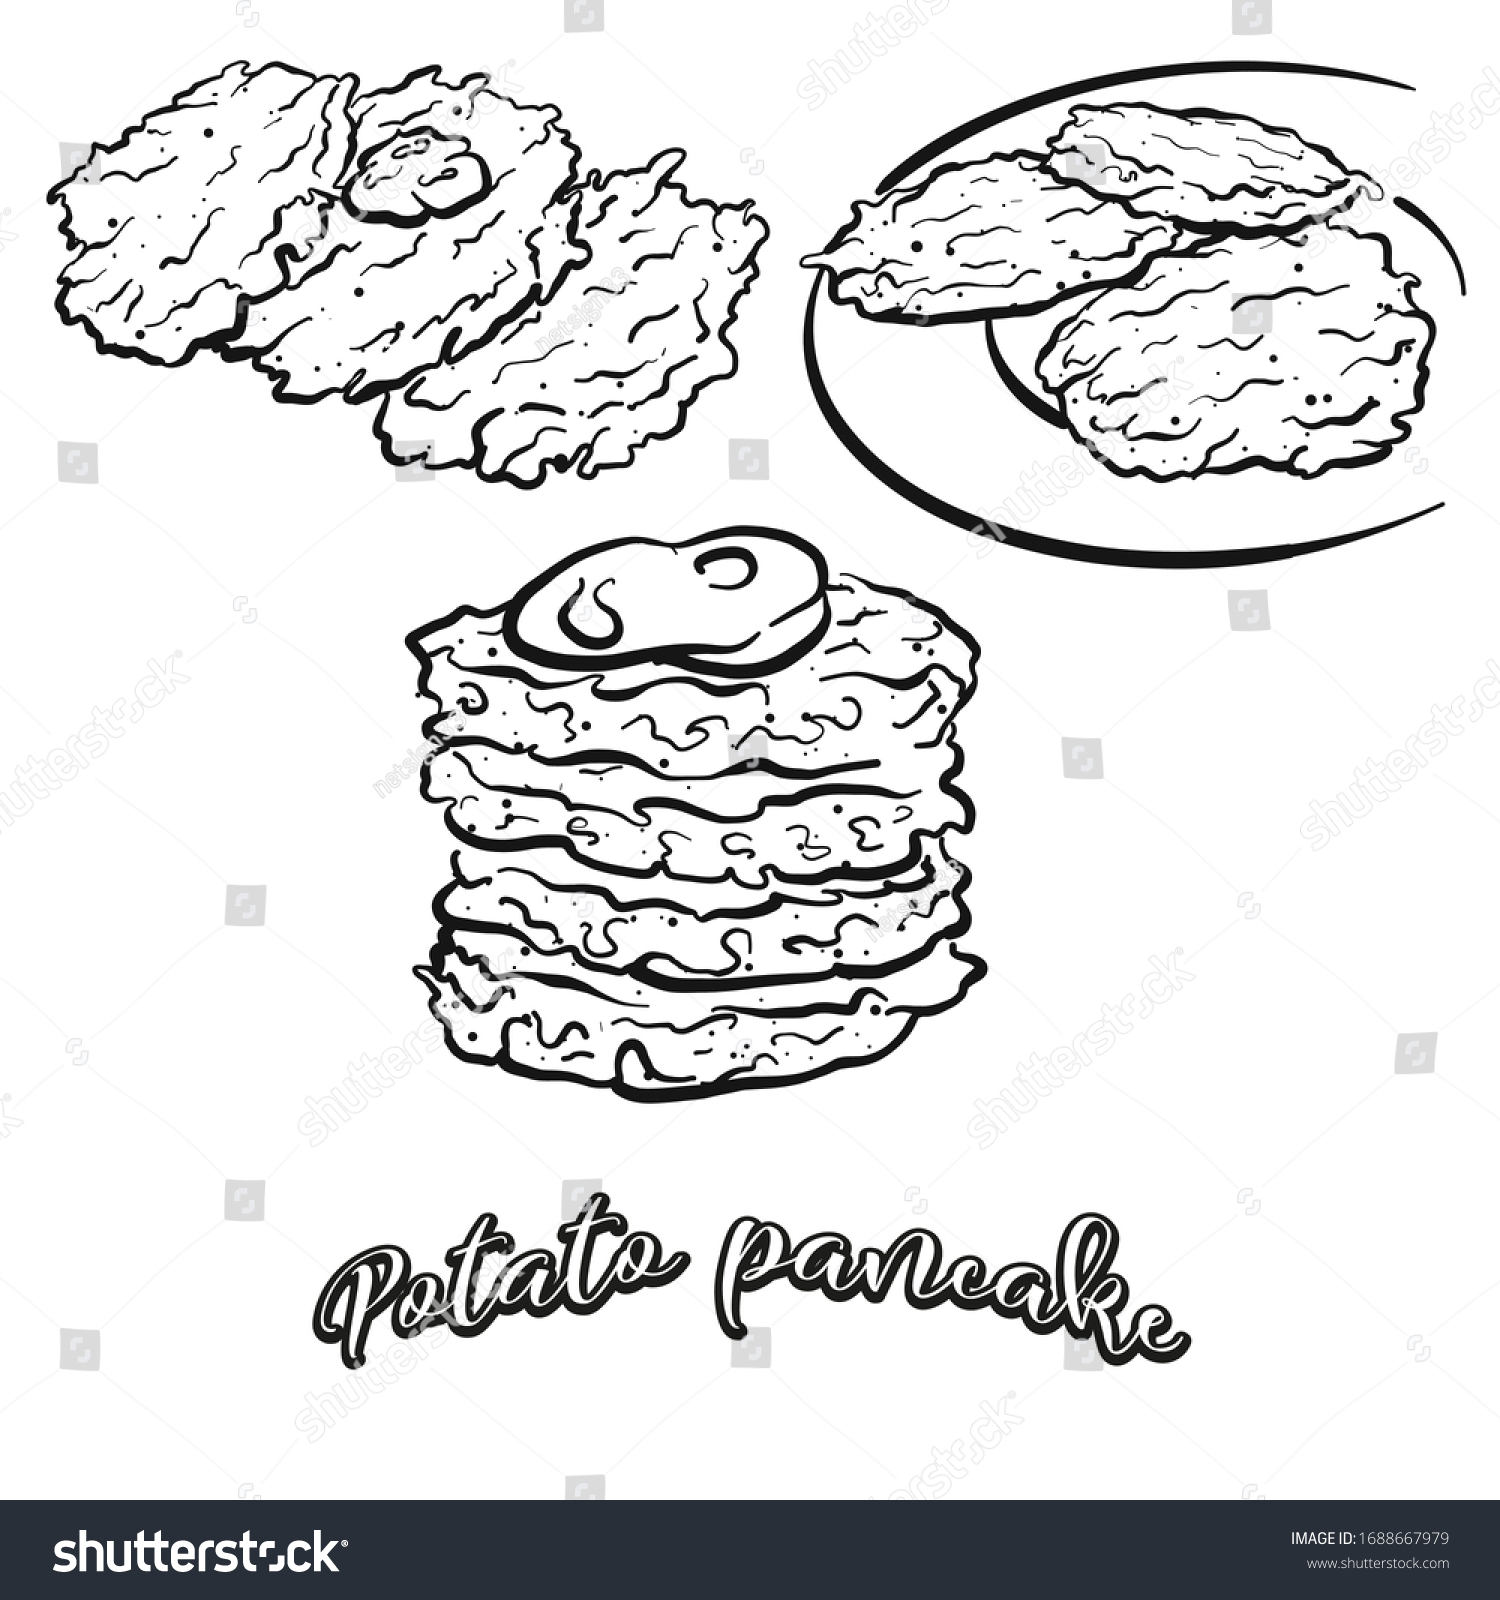 SVG of Potato pancake food sketch separated on white. Vector drawing of Pancake, usually known in Slovakia, Germany. Food illustration series. svg